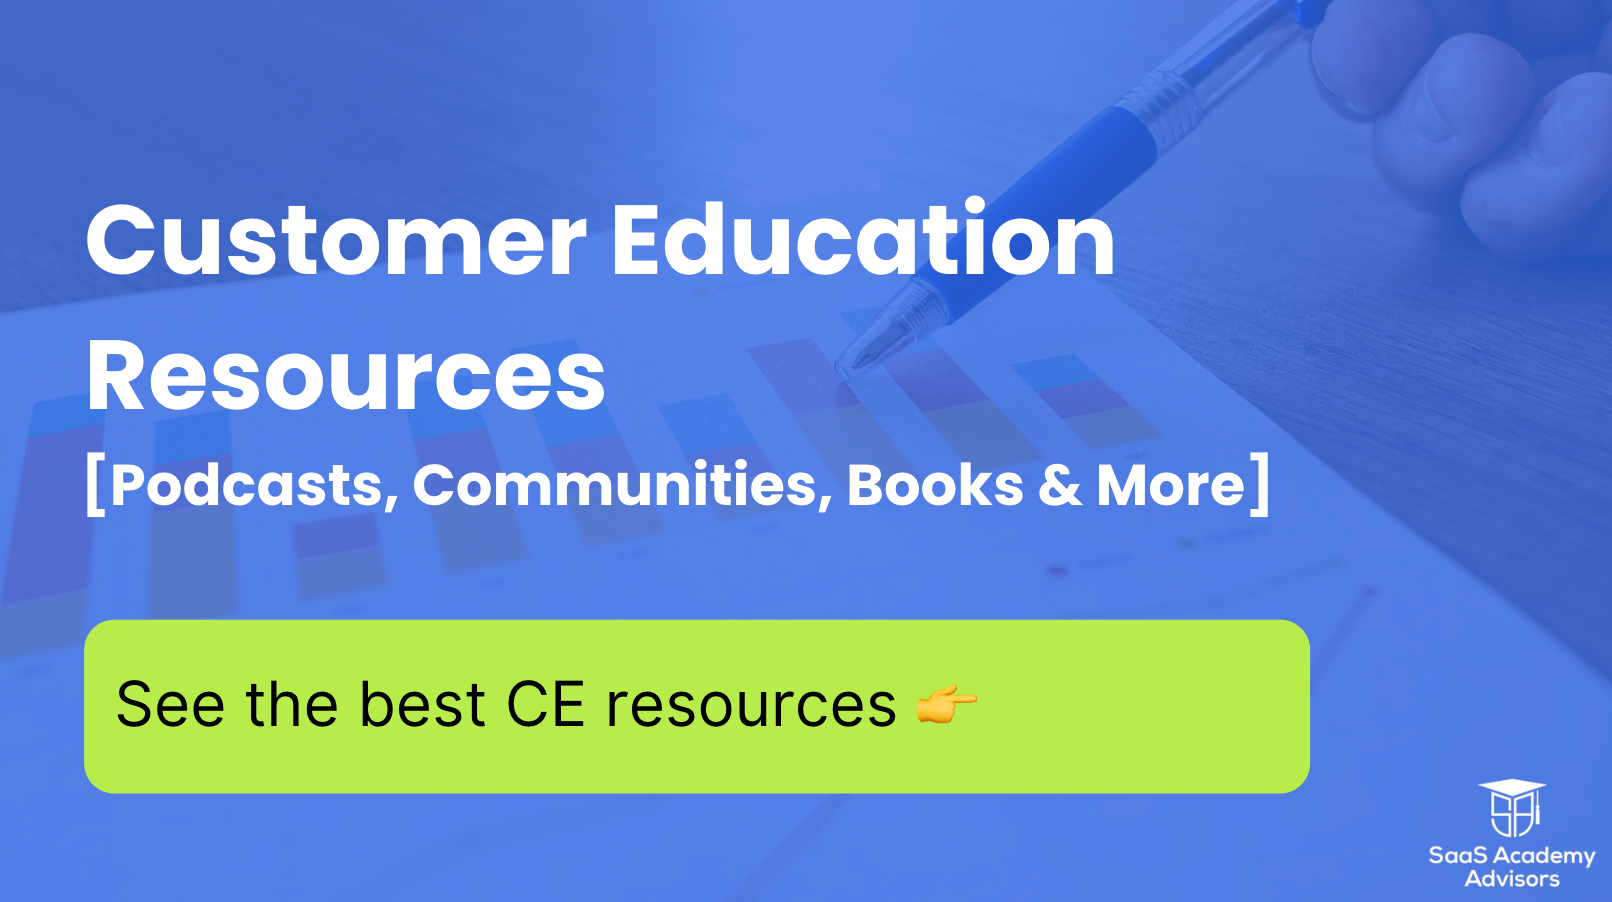 Top Customer Education Resources [Communities, Podcasts, Books]